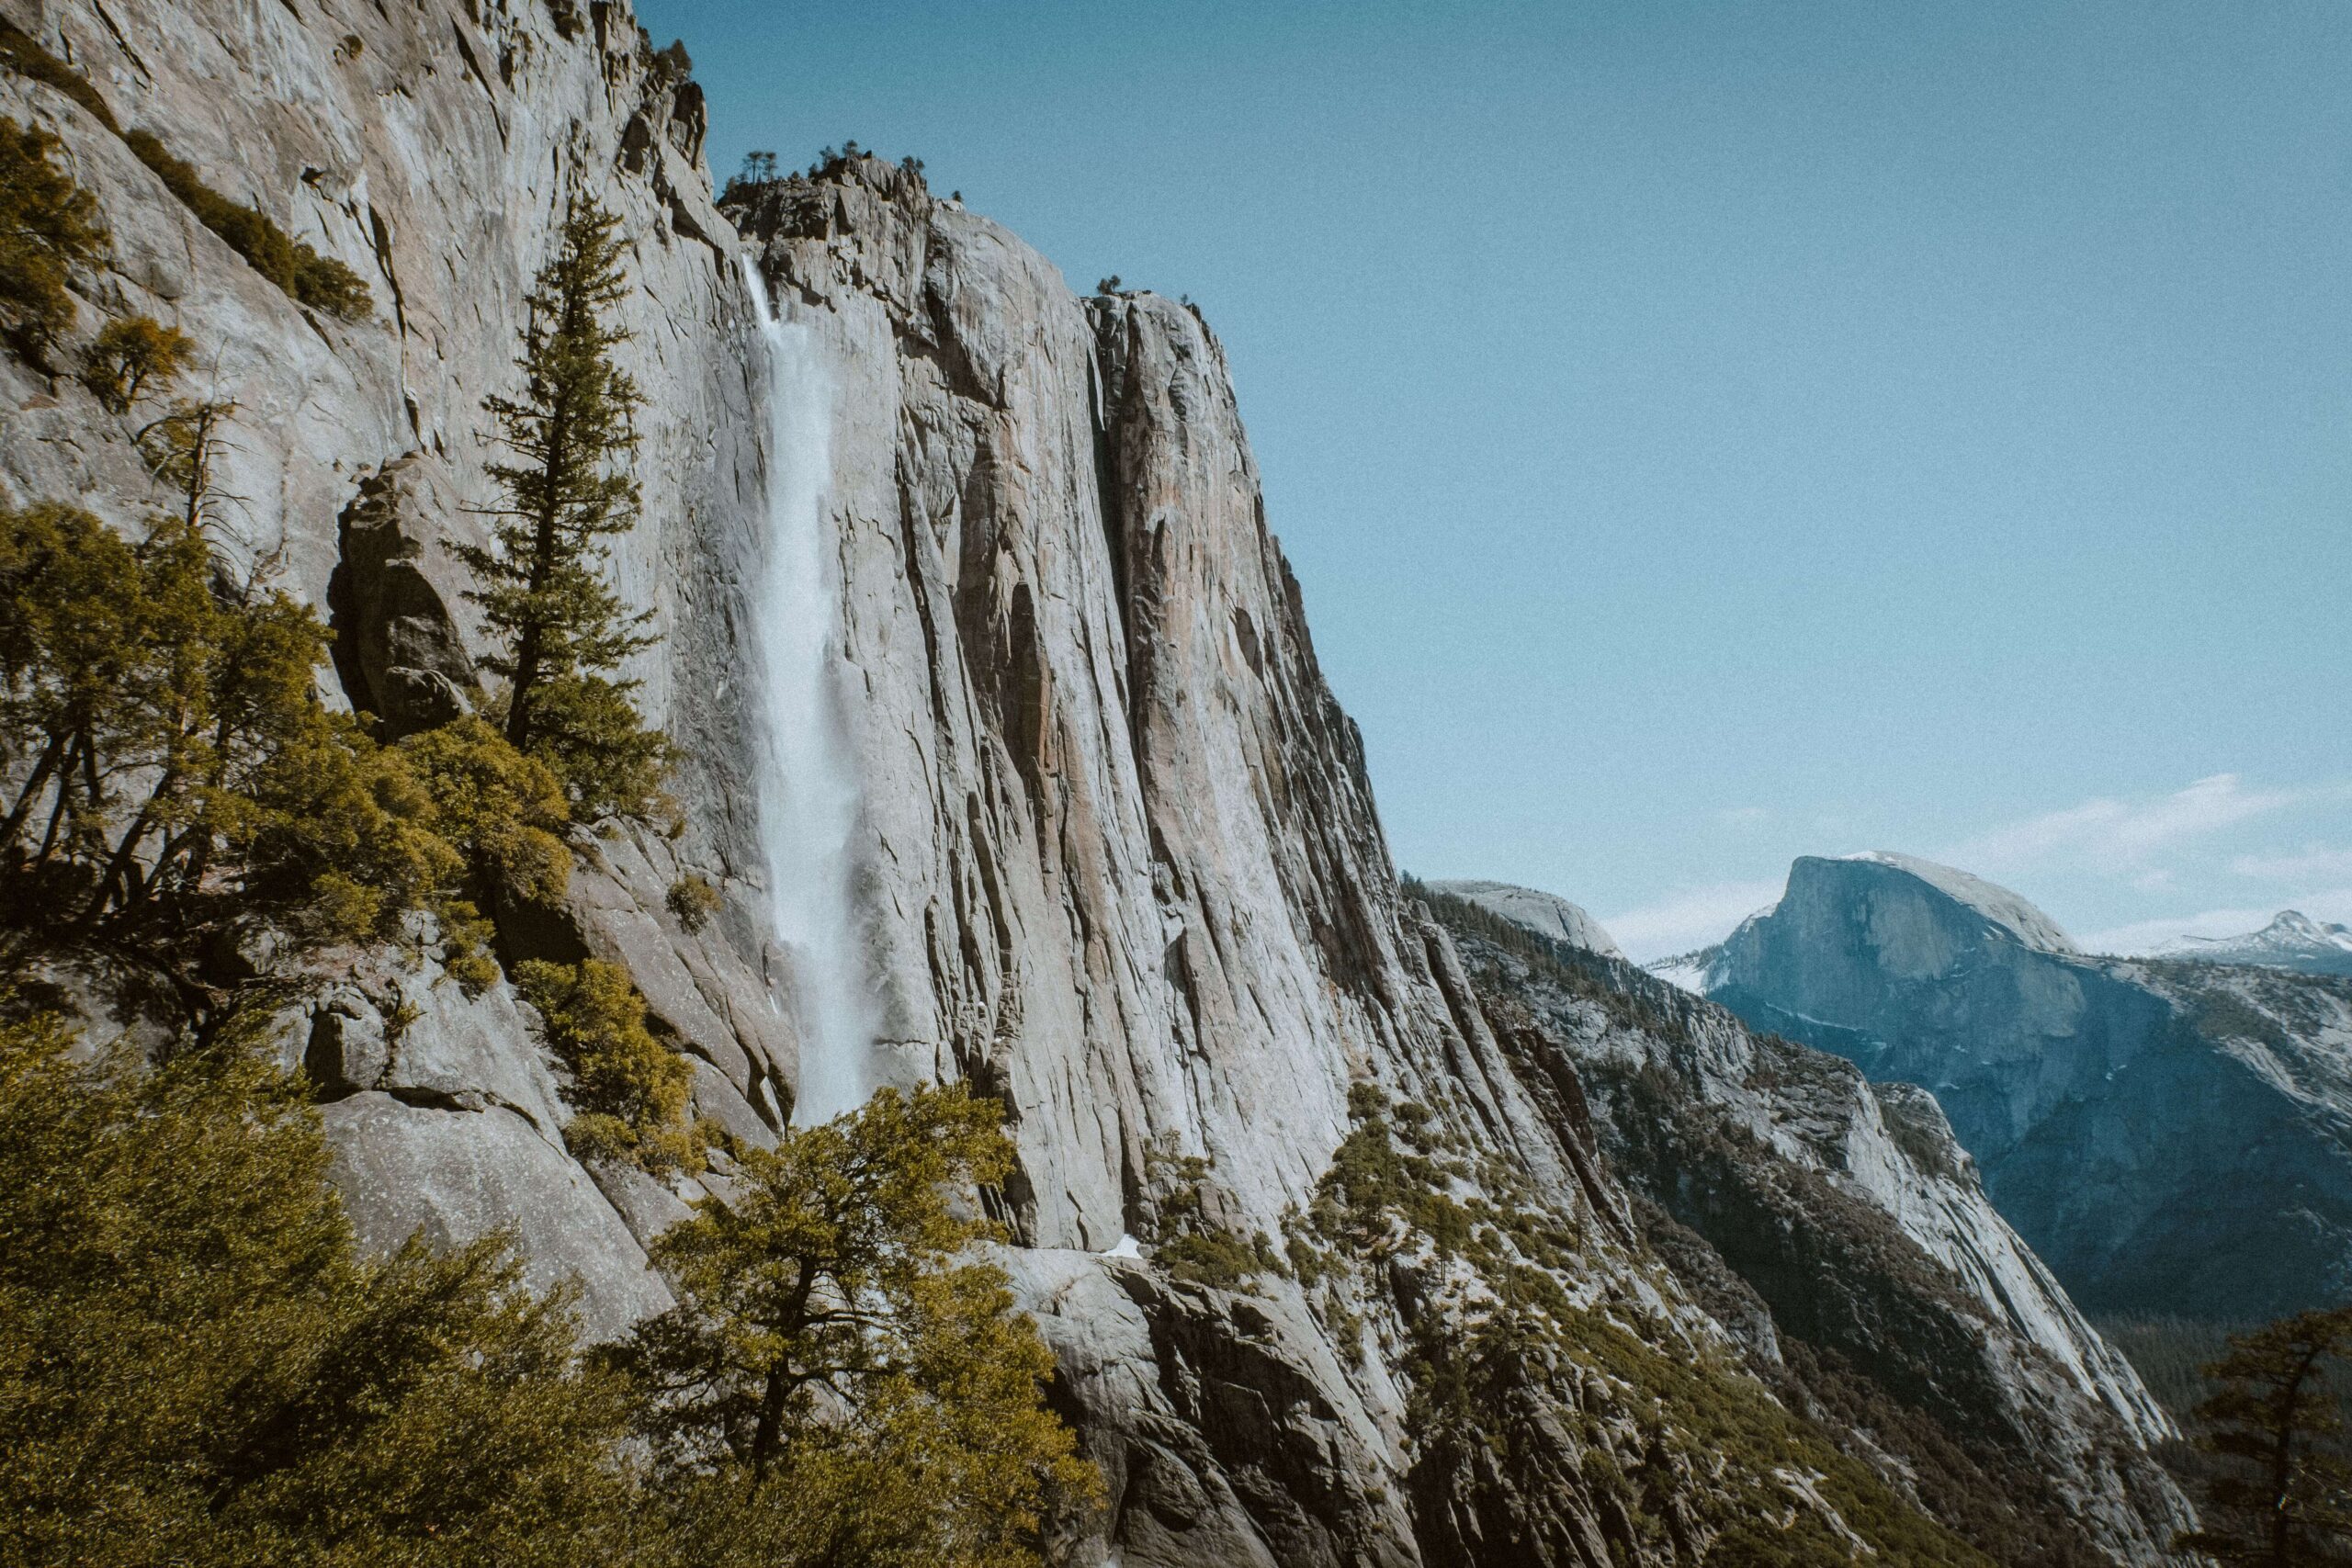 Conquering the upper yosemite falls hike: A guide to scaling the falls